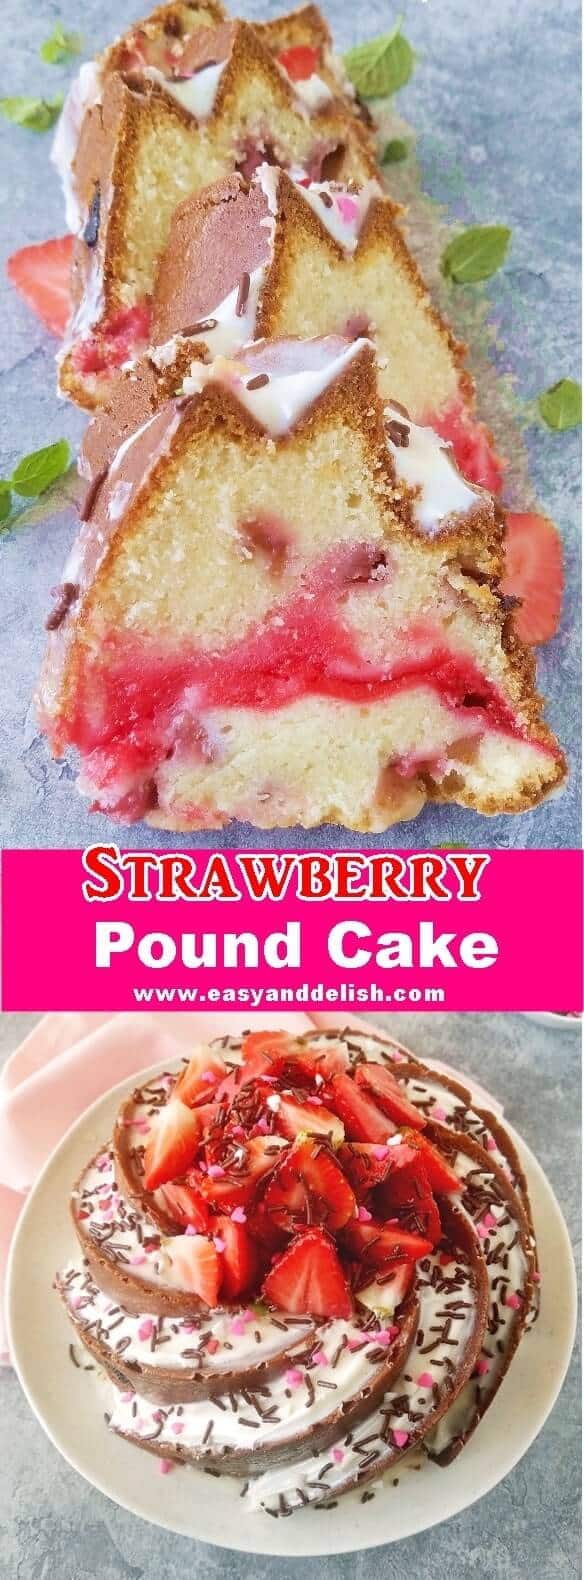 2 close up combined images of strawberry pound cake